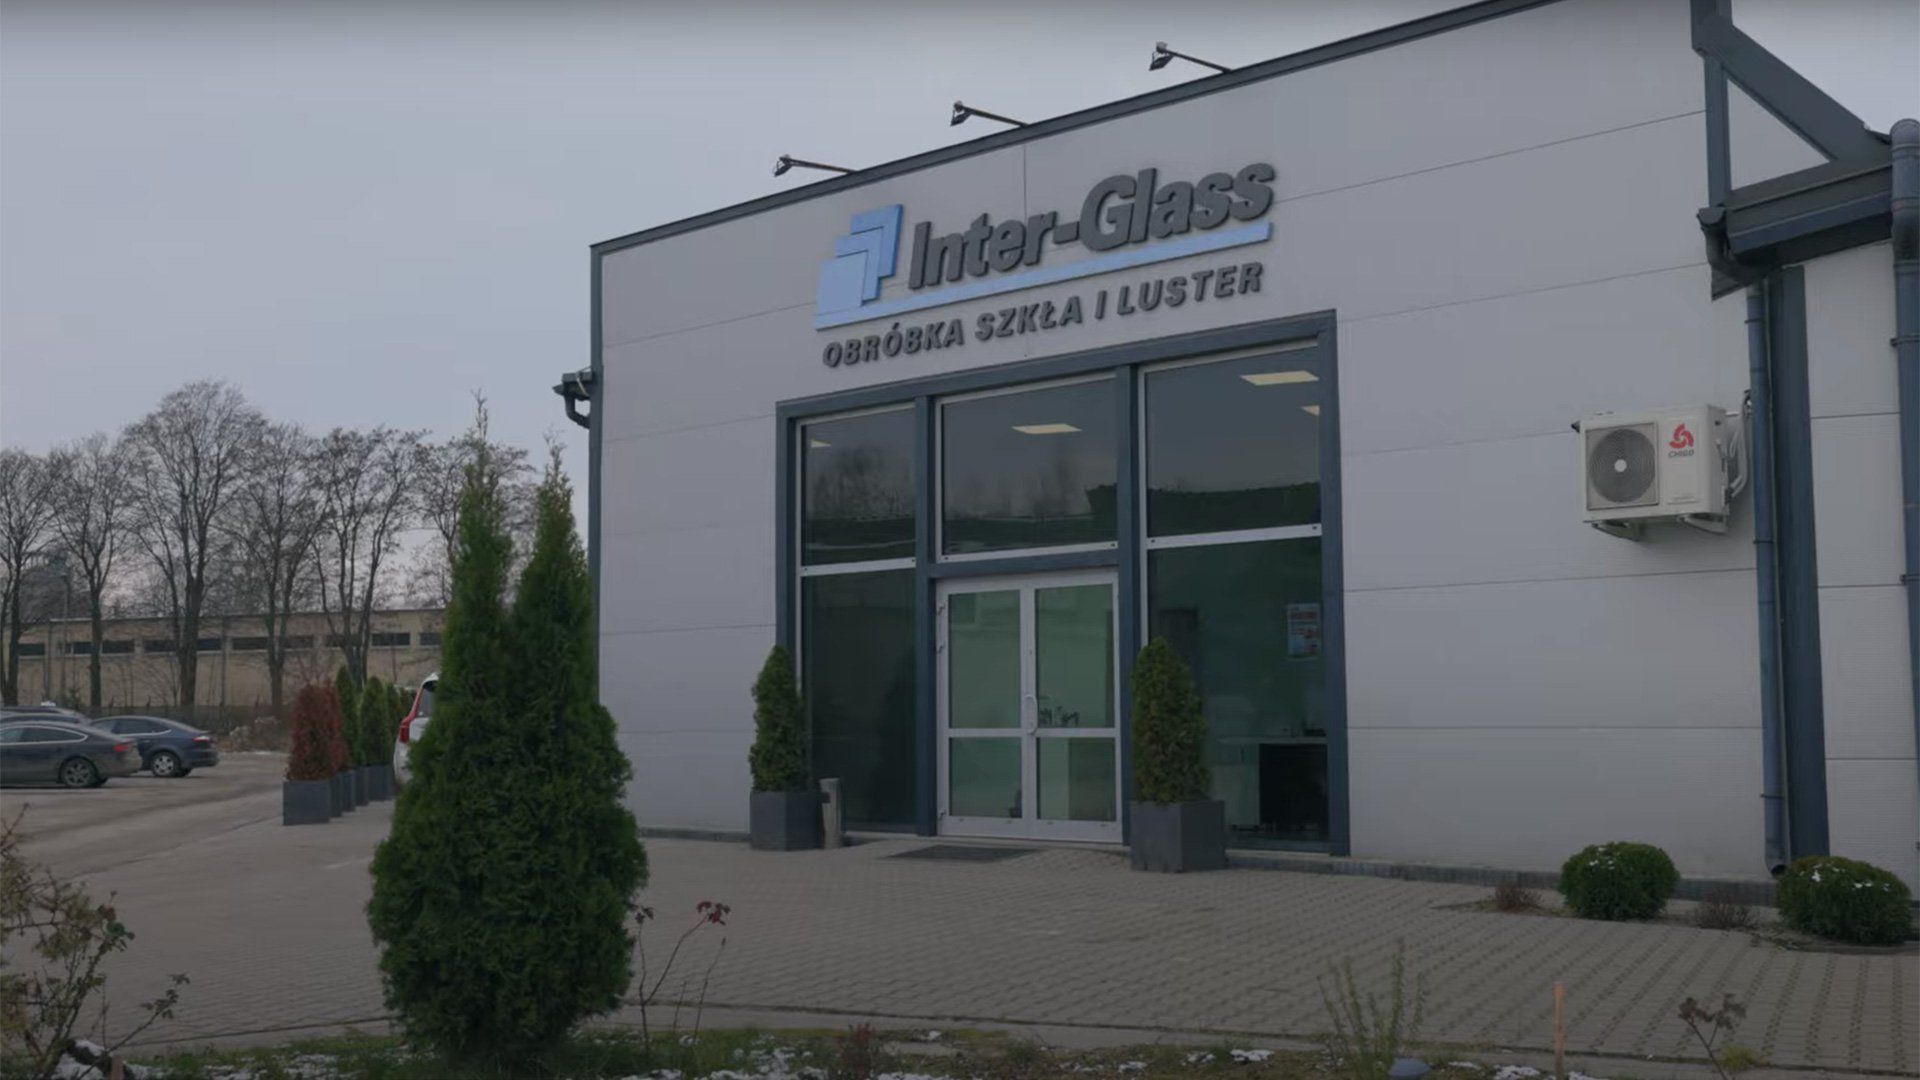 Watch the Inter-Glass case study video